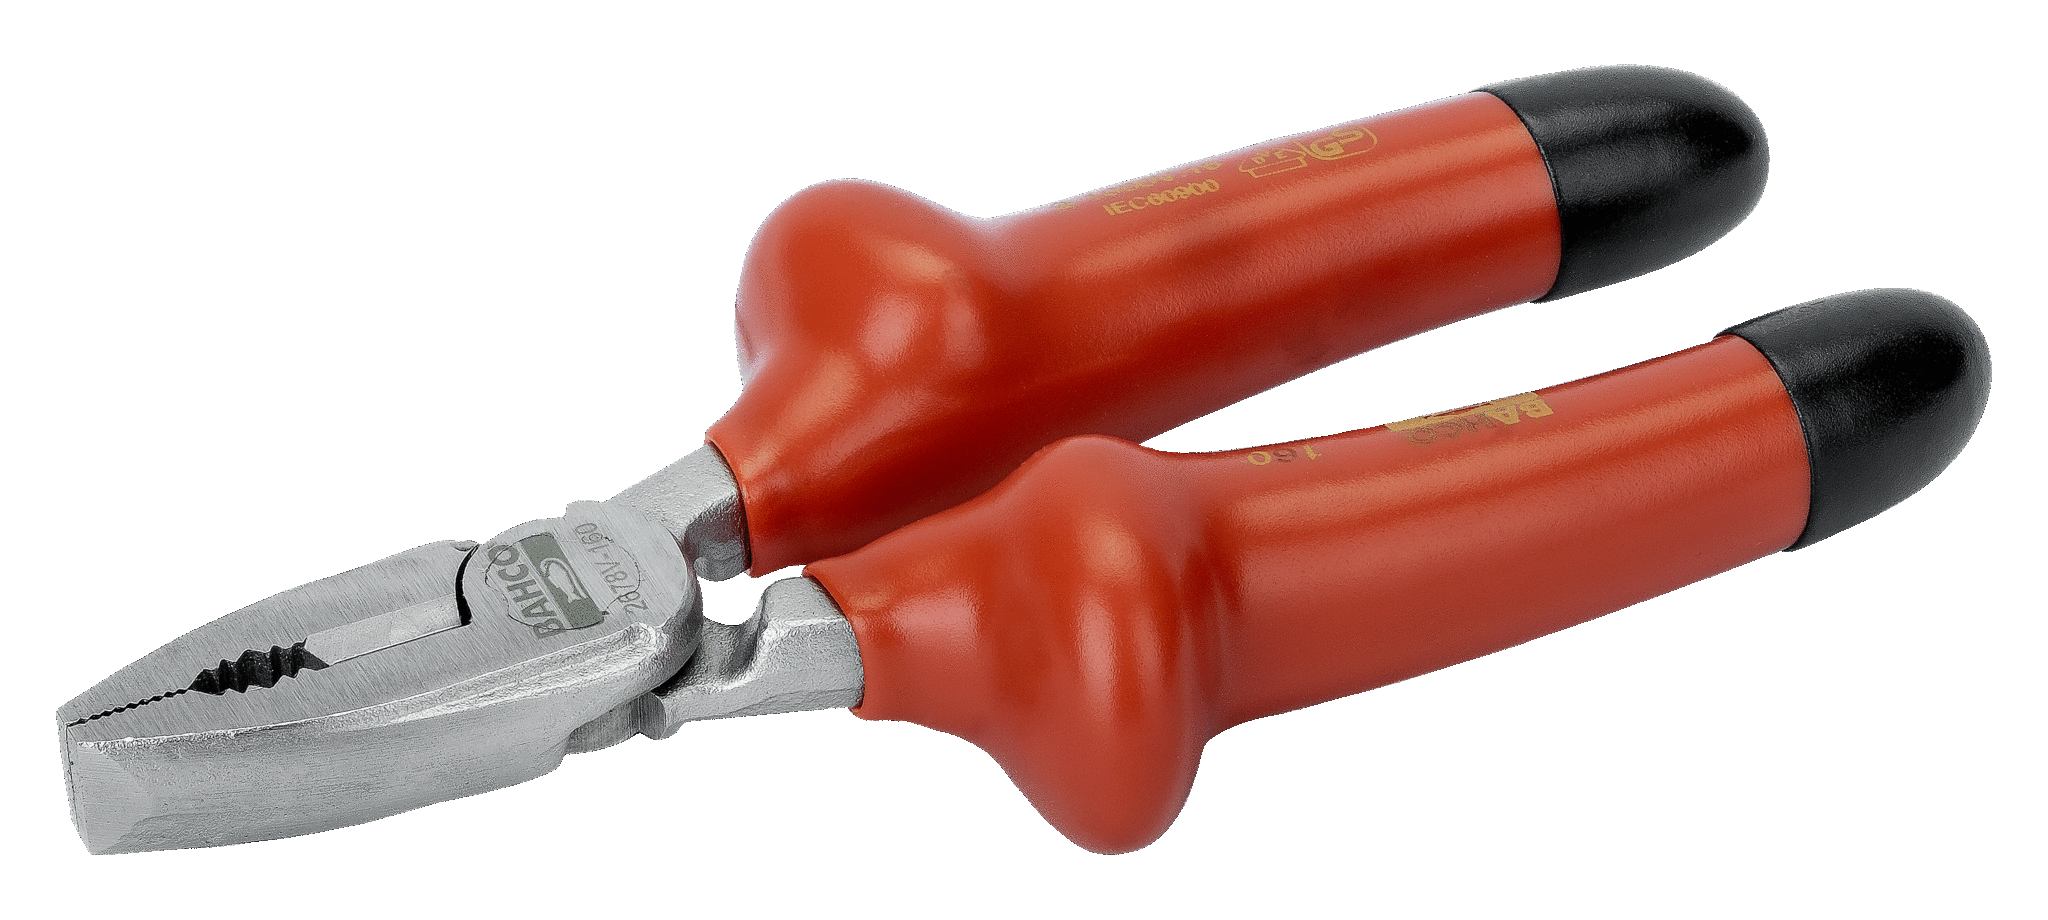 VDE Insulated Combination Pliers | BAHCO | Bahco International